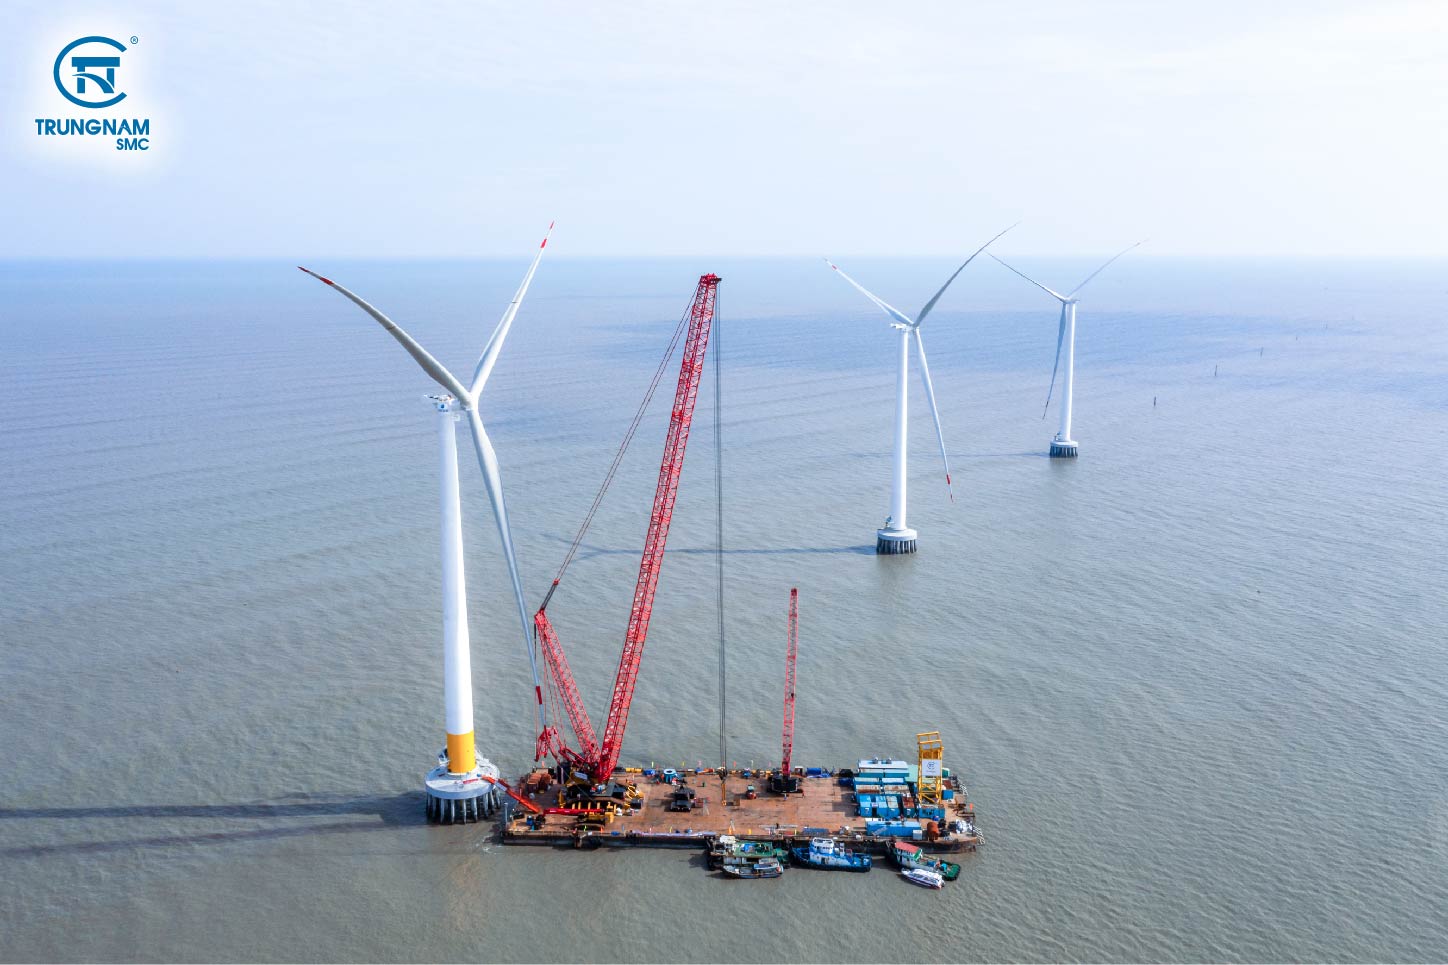 Barges to install wind turbines at sea - Ca Mau 1B wind power project